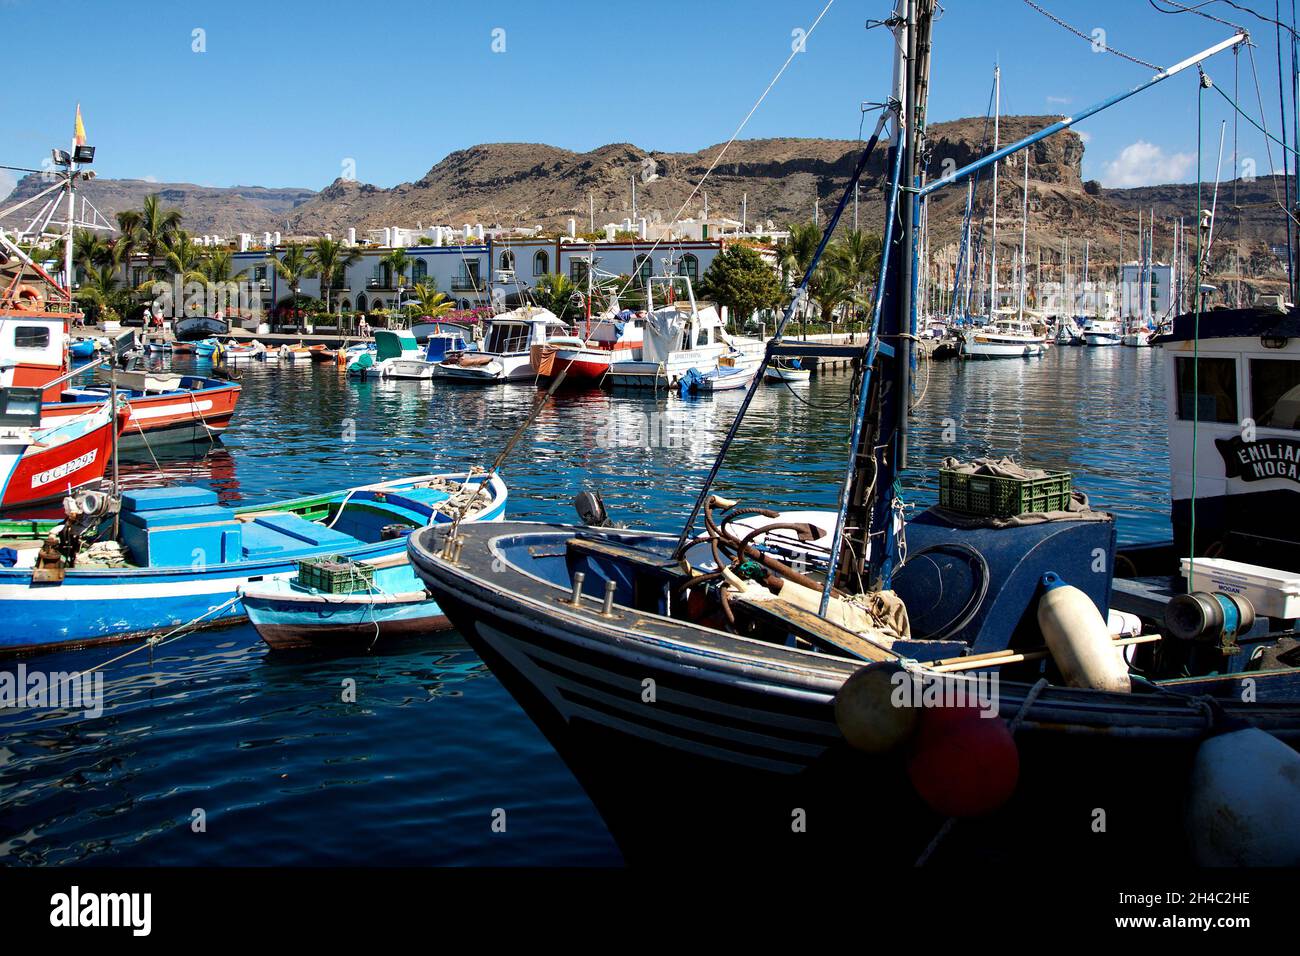 Sailboats in the port of Puerto Mogan on Gran Canaria, Spain Stock Photo